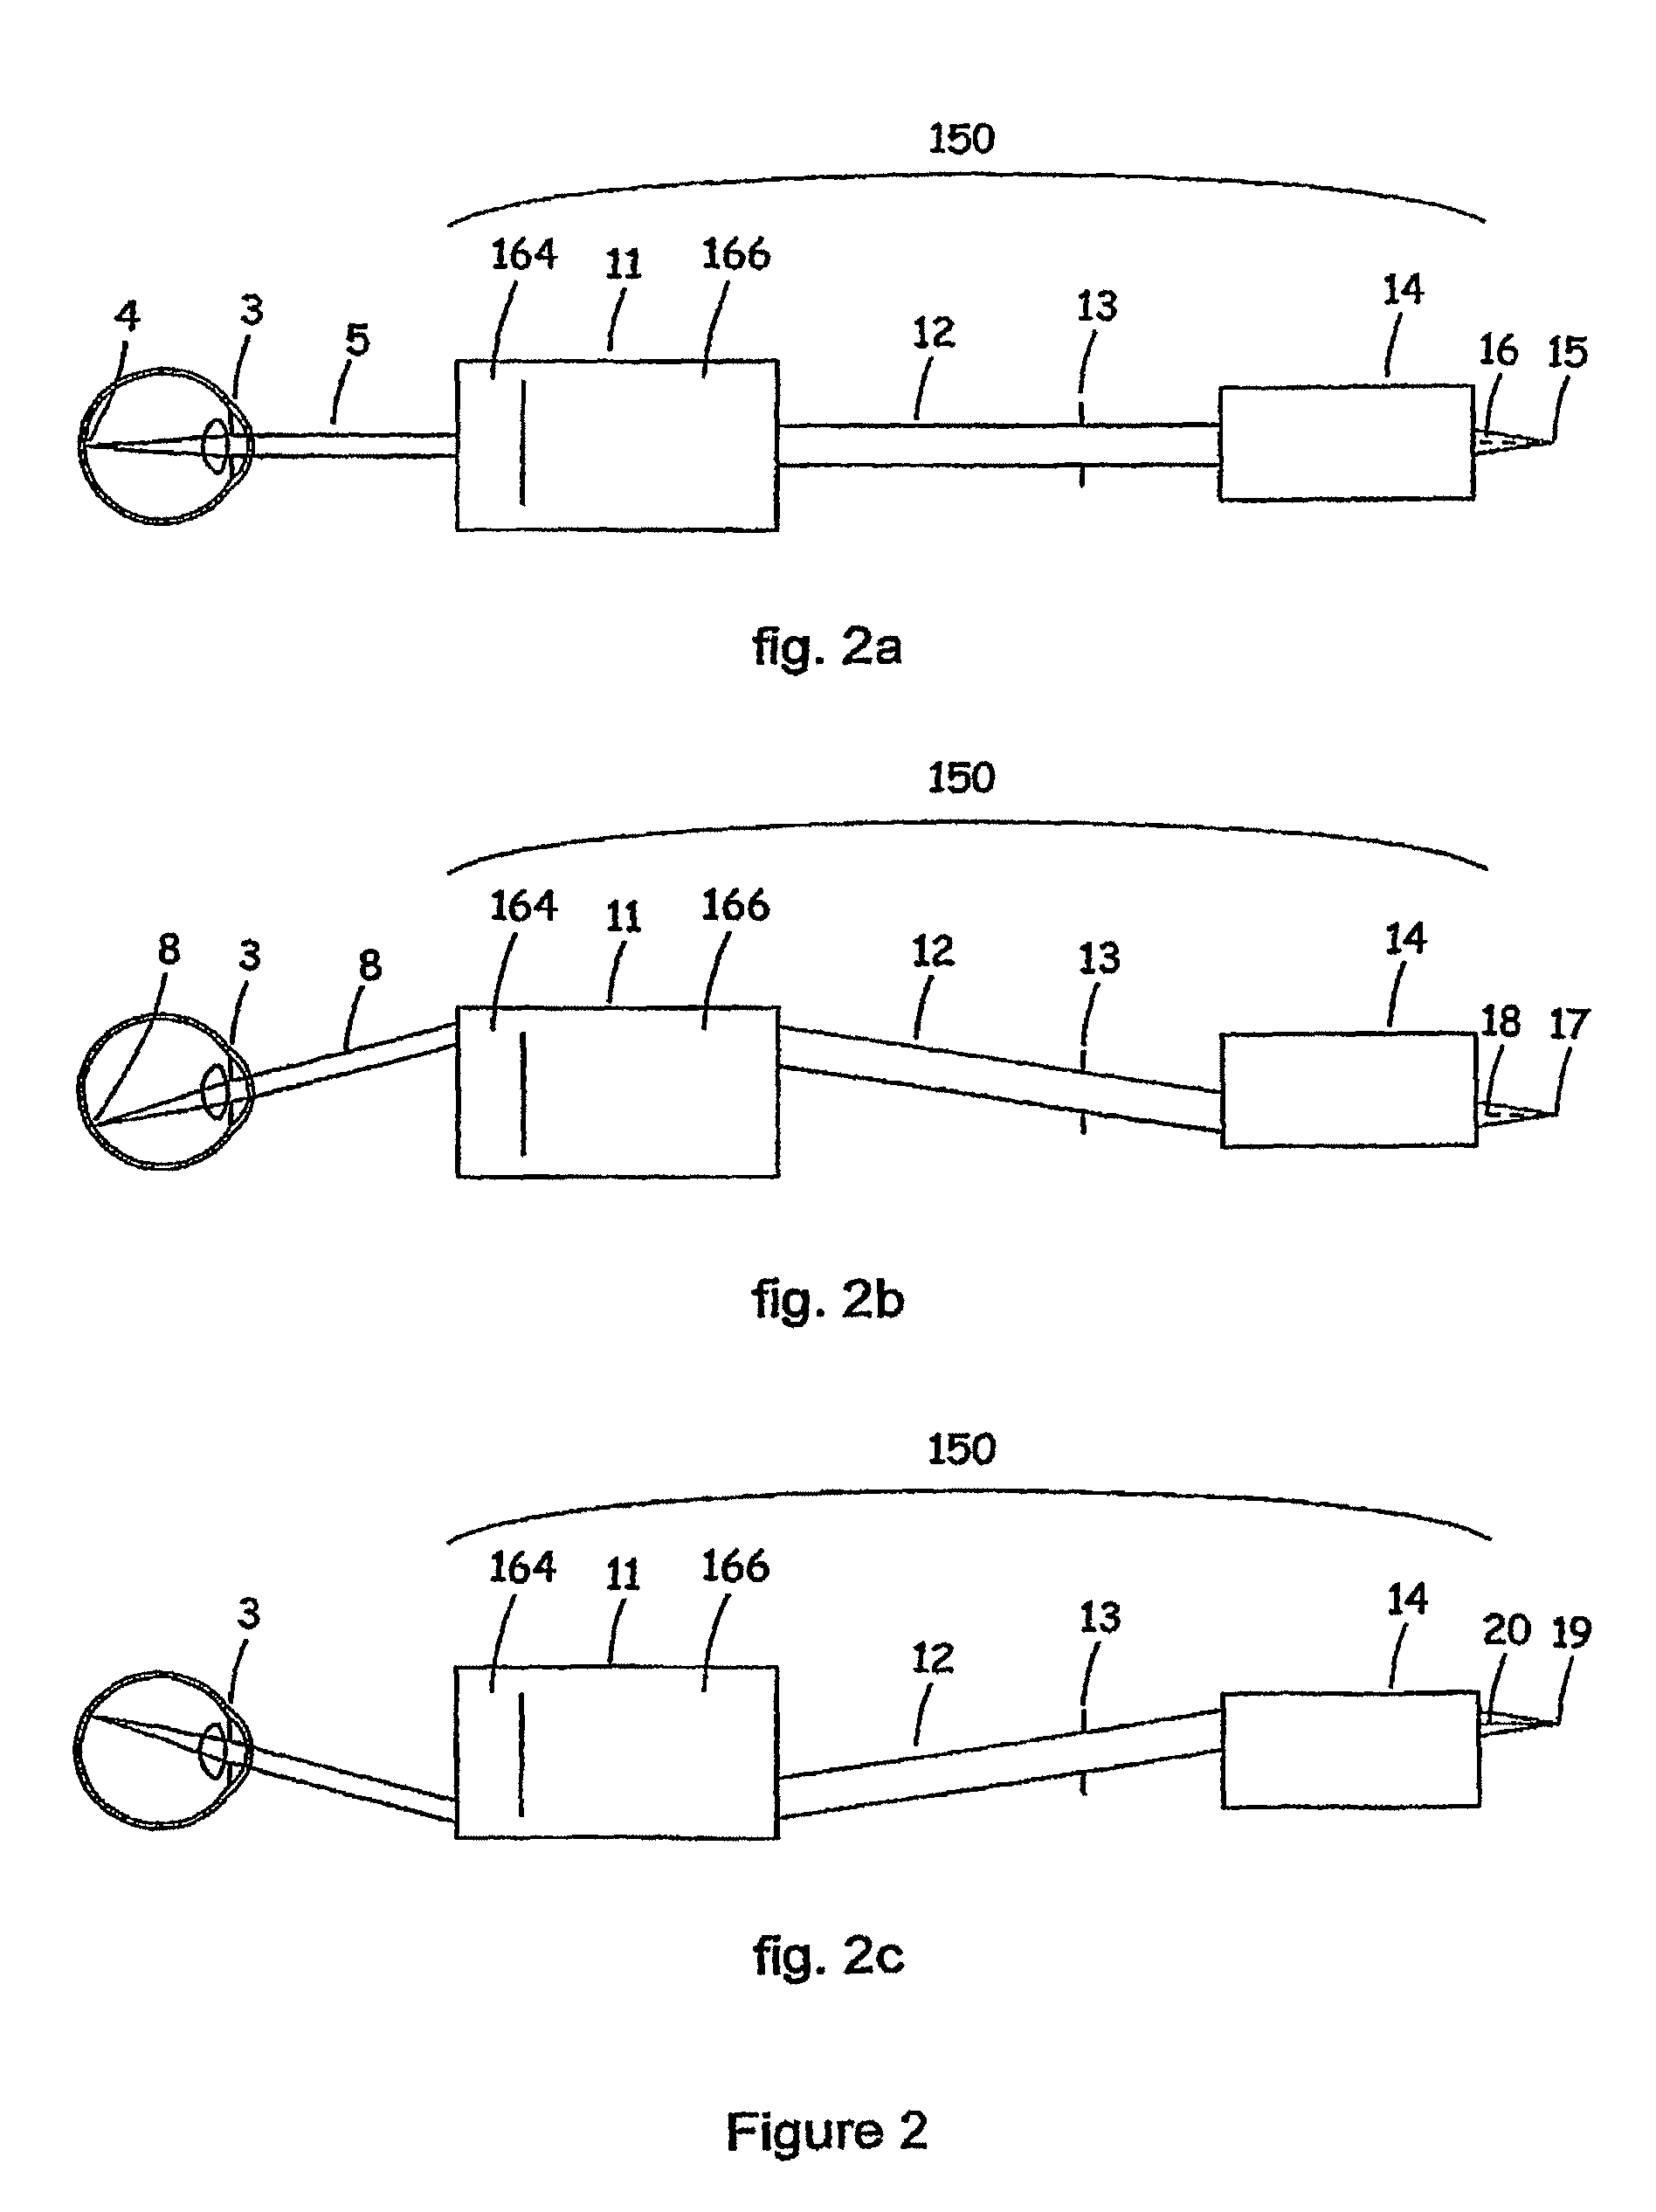 Choroid and retinal imaging and treatment system